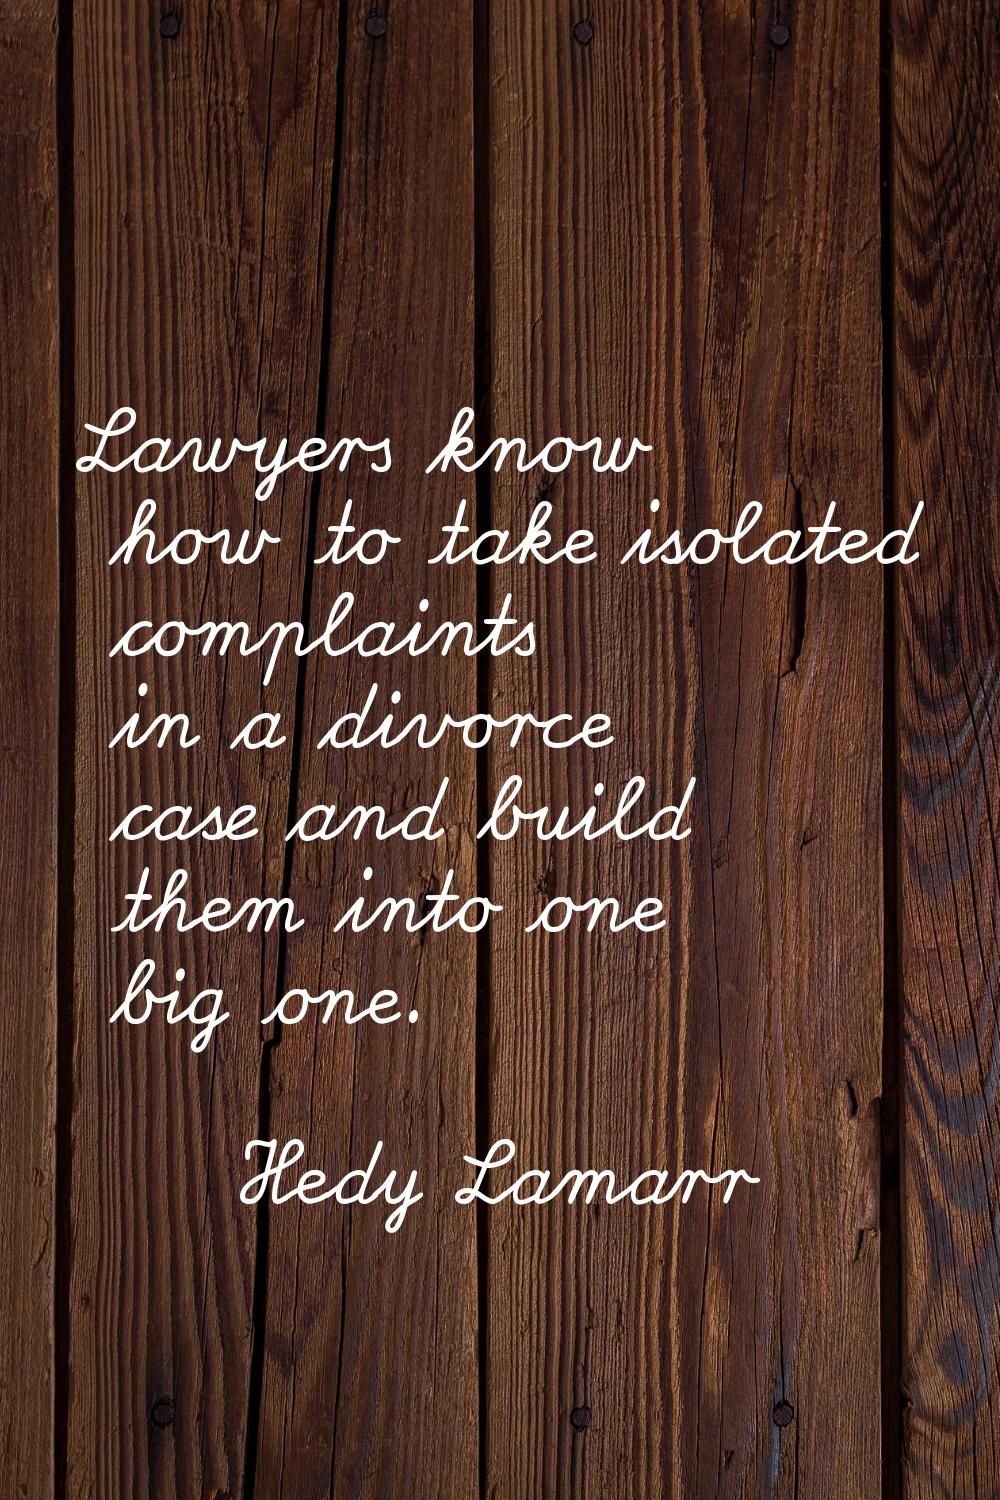 Lawyers know how to take isolated complaints in a divorce case and build them into one big one.